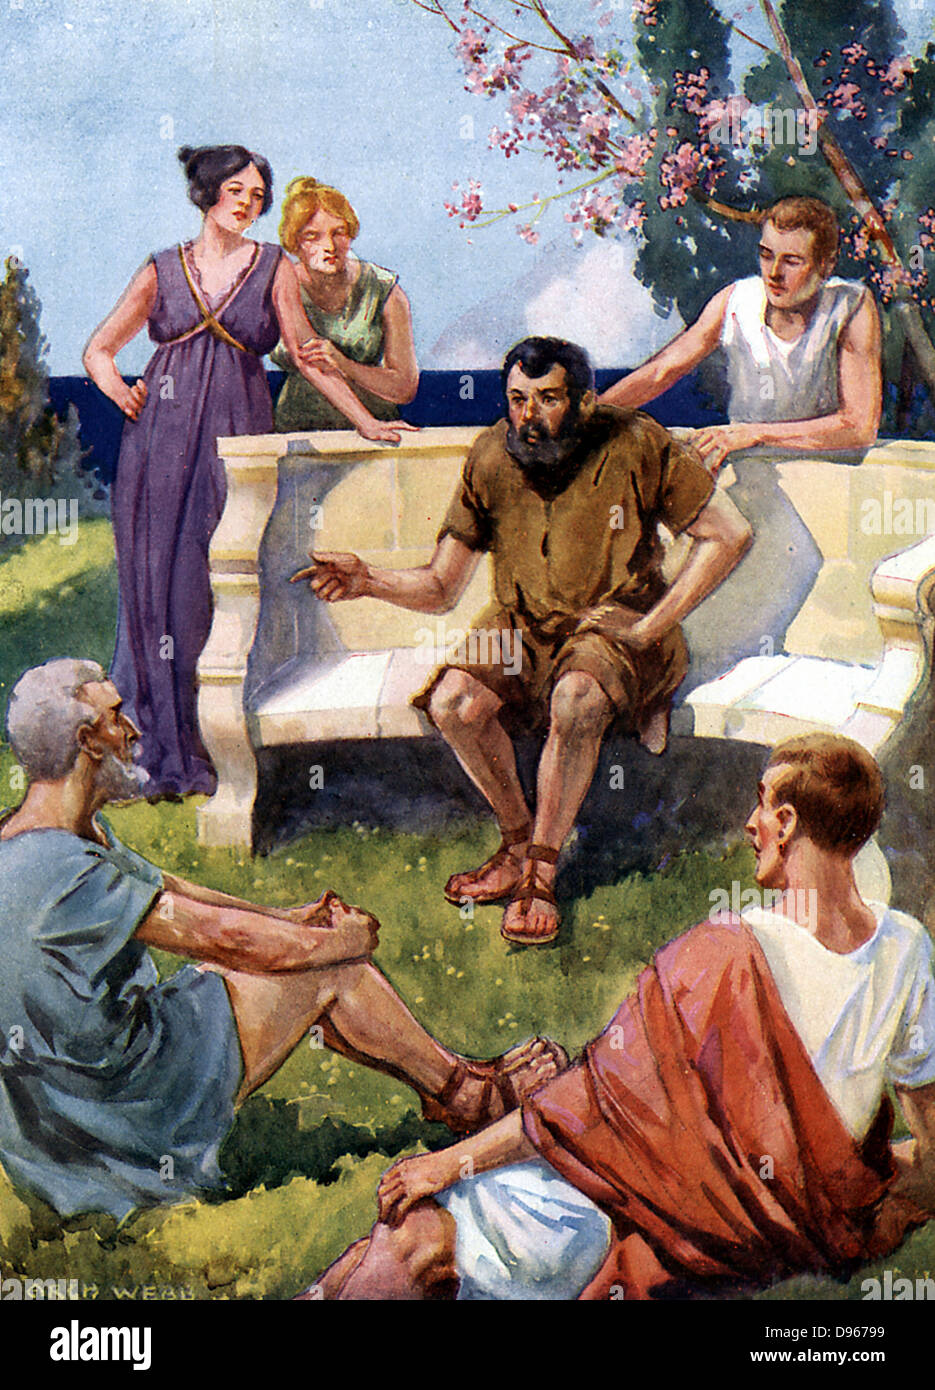 Aesop - probably legendary Greek fabulist. According to Herodotus, he lived in the 6th century BC. Aesop holding his audience enthralled. Artist's reconstruction c1900. Stock Photo